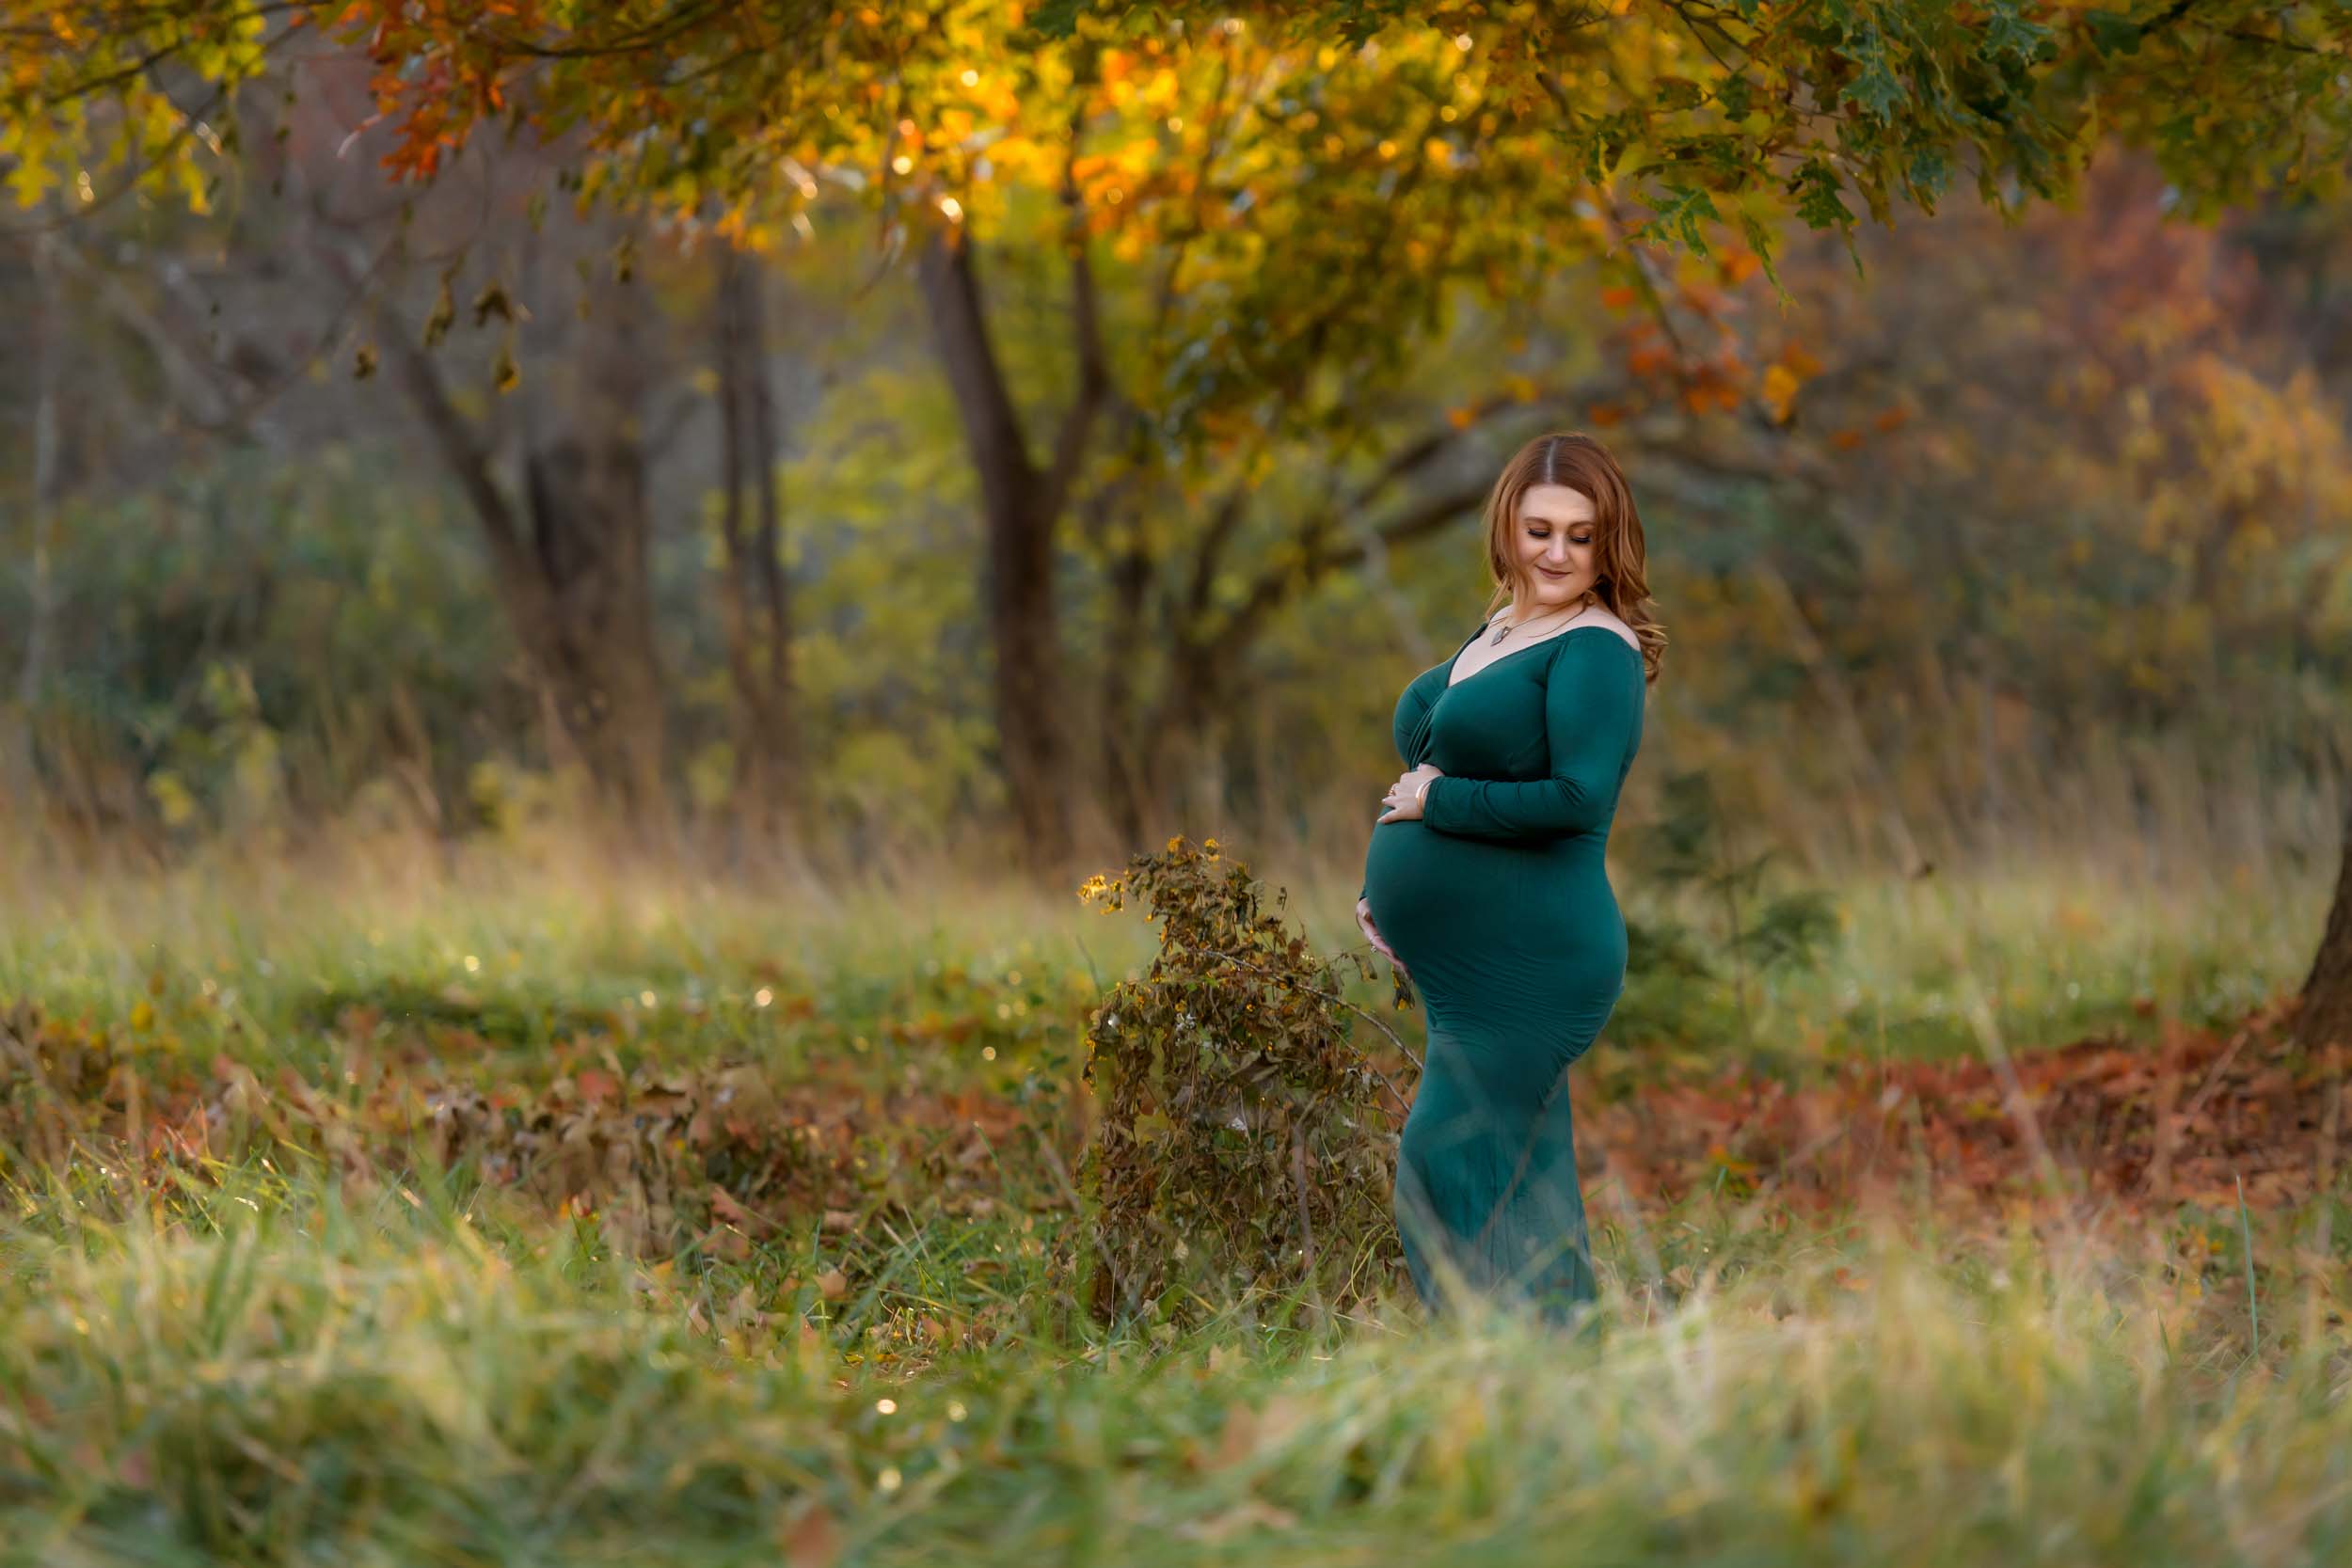 Beautiful fall maternity photo from the Biltmore estate.